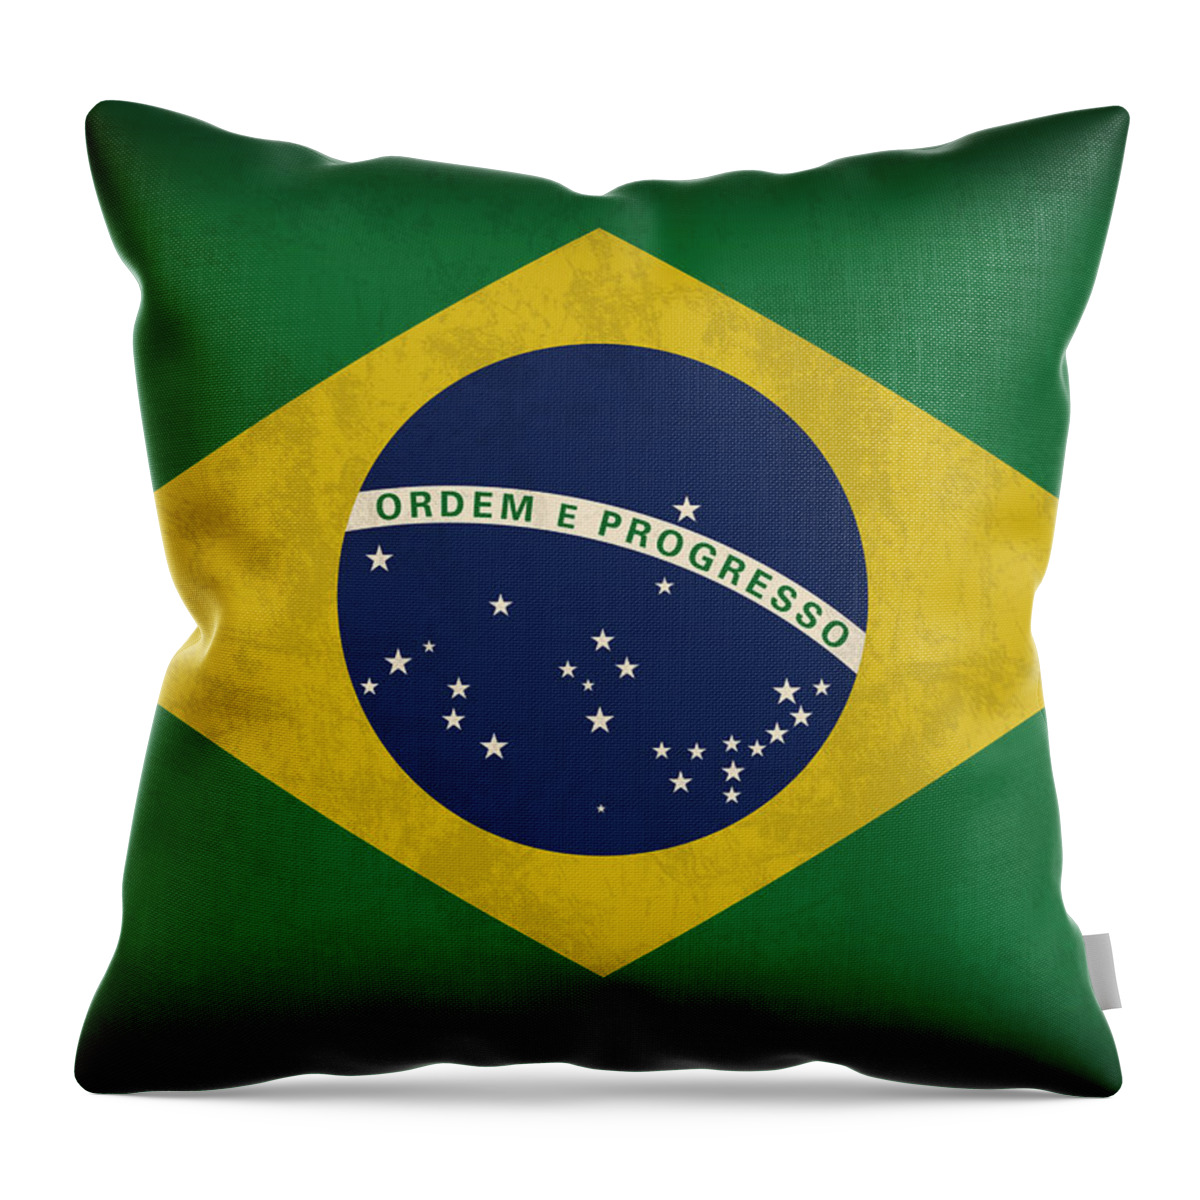 Brazil Flag Throw Pillow featuring the mixed media Brazil Flag Vintage Distressed Finish by Design Turnpike